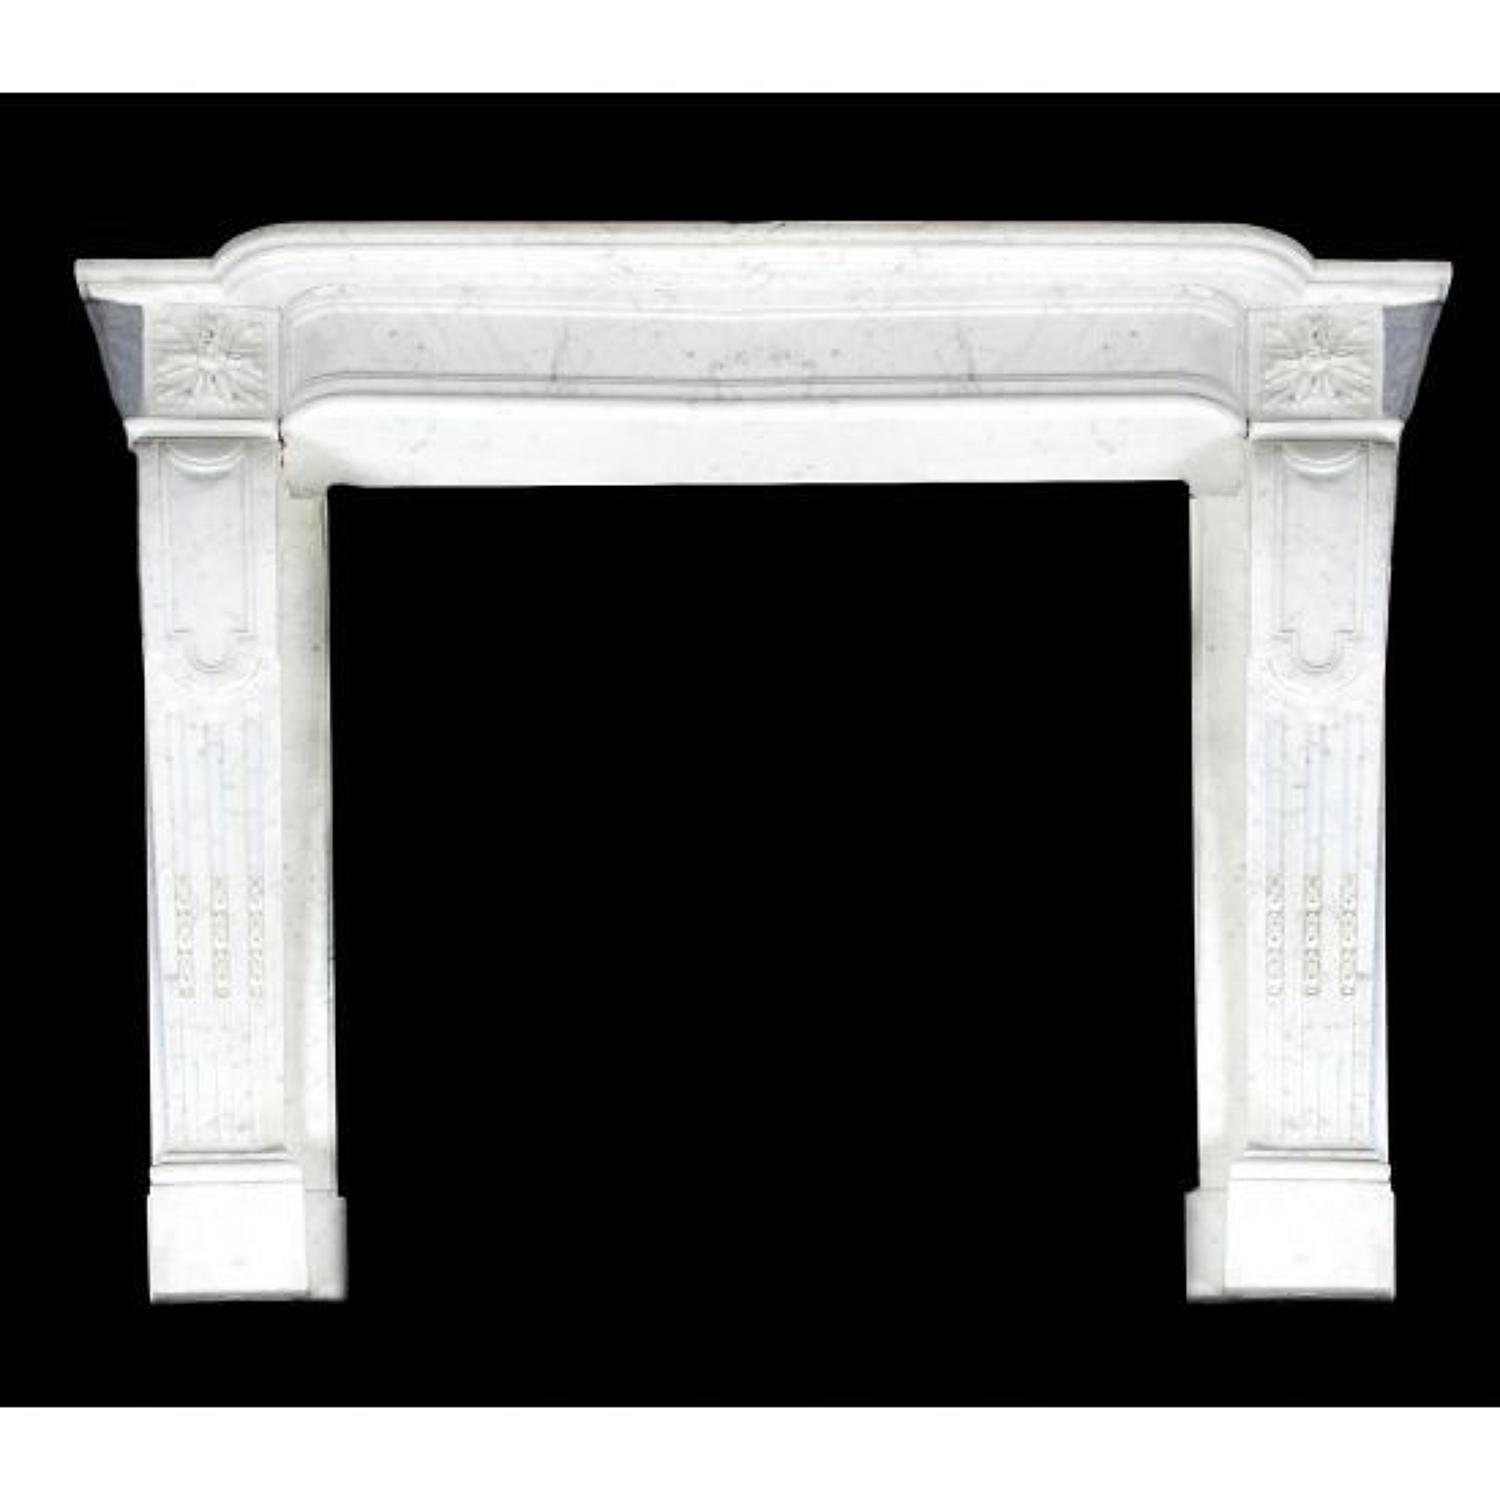 A variegated white marble chimneypiece